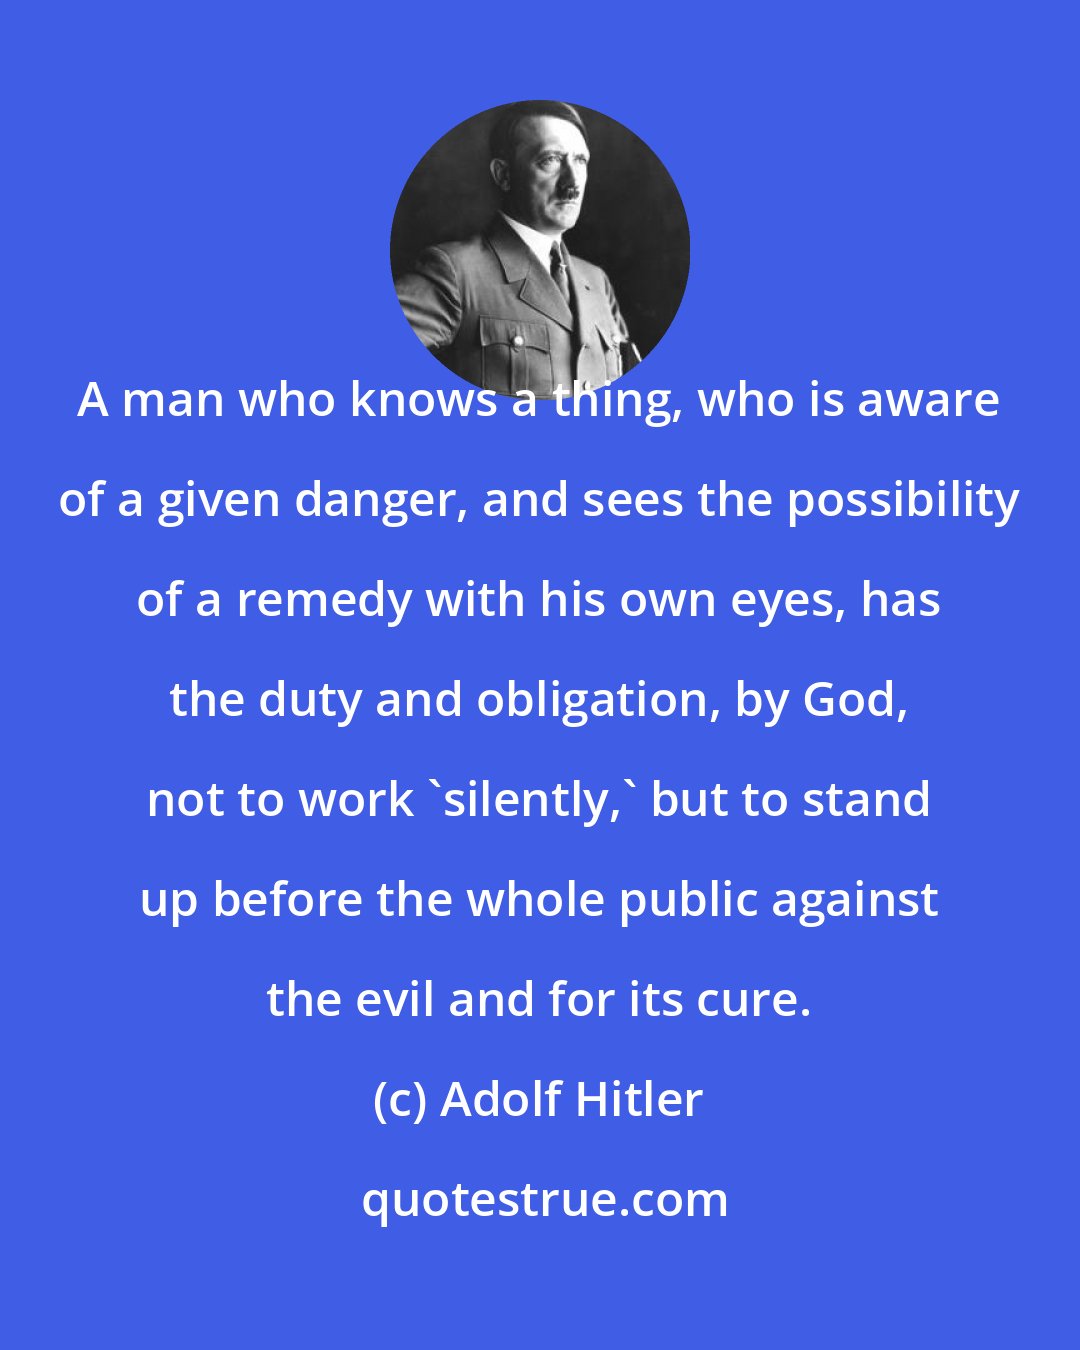 Adolf Hitler: A man who knows a thing, who is aware of a given danger, and sees the possibility of a remedy with his own eyes, has the duty and obligation, by God, not to work 'silently,' but to stand up before the whole public against the evil and for its cure.